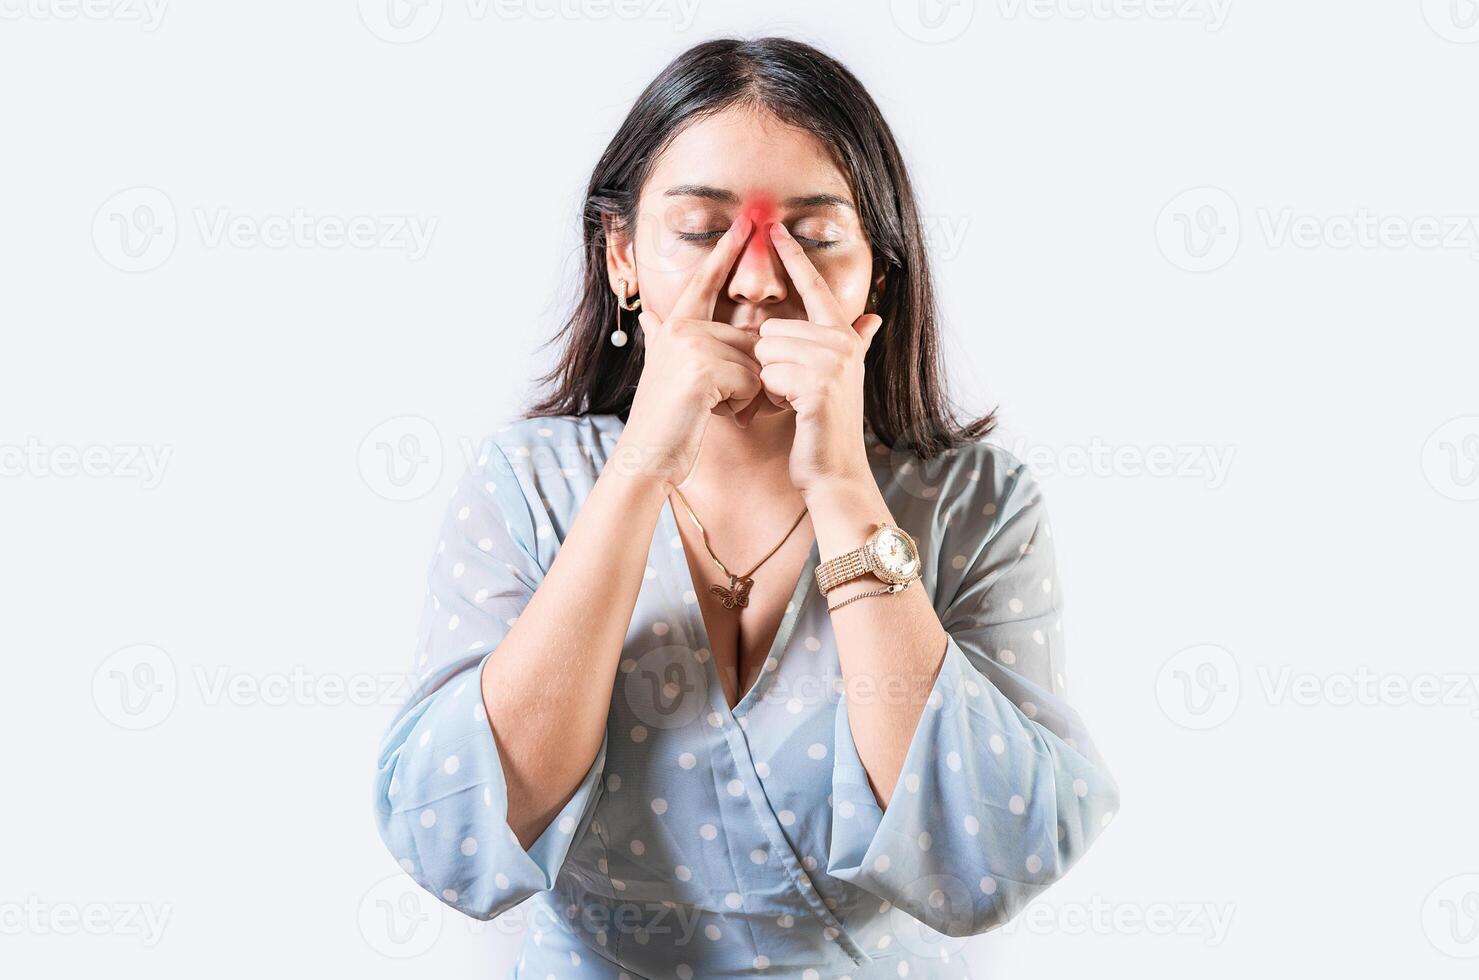 Girl with nasal bridge headache. Sinus pain concept. Young woman with pain touching nose. Person with nasal bridge pain photo